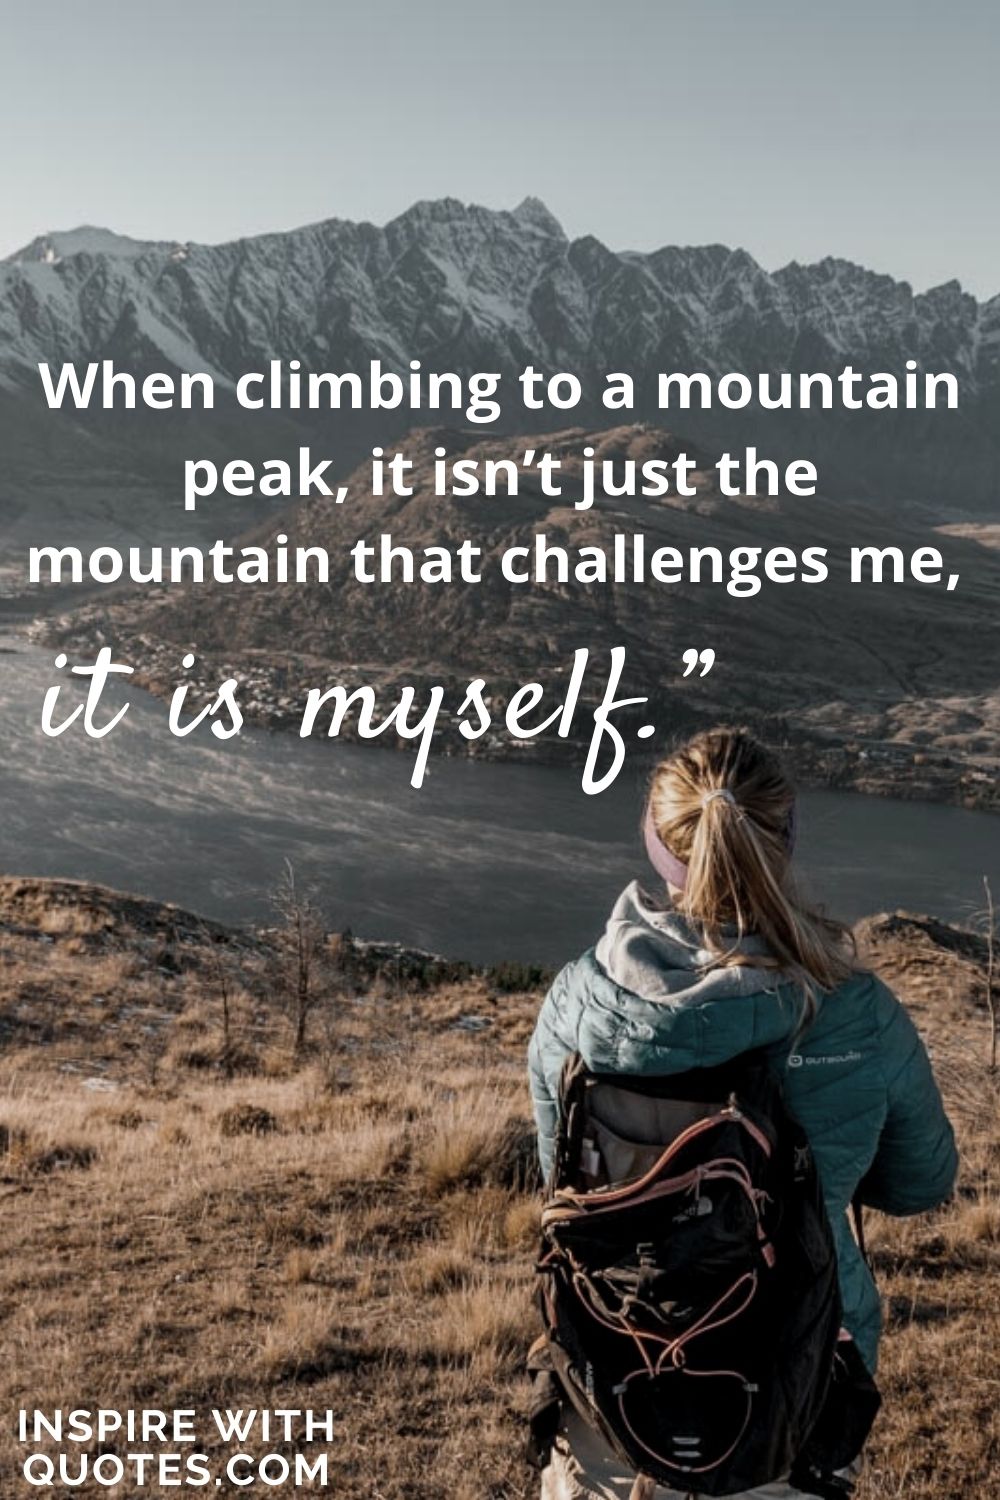 101 Witty & Inspiring Mountain Captions for Instagram -Inspire with Quotes